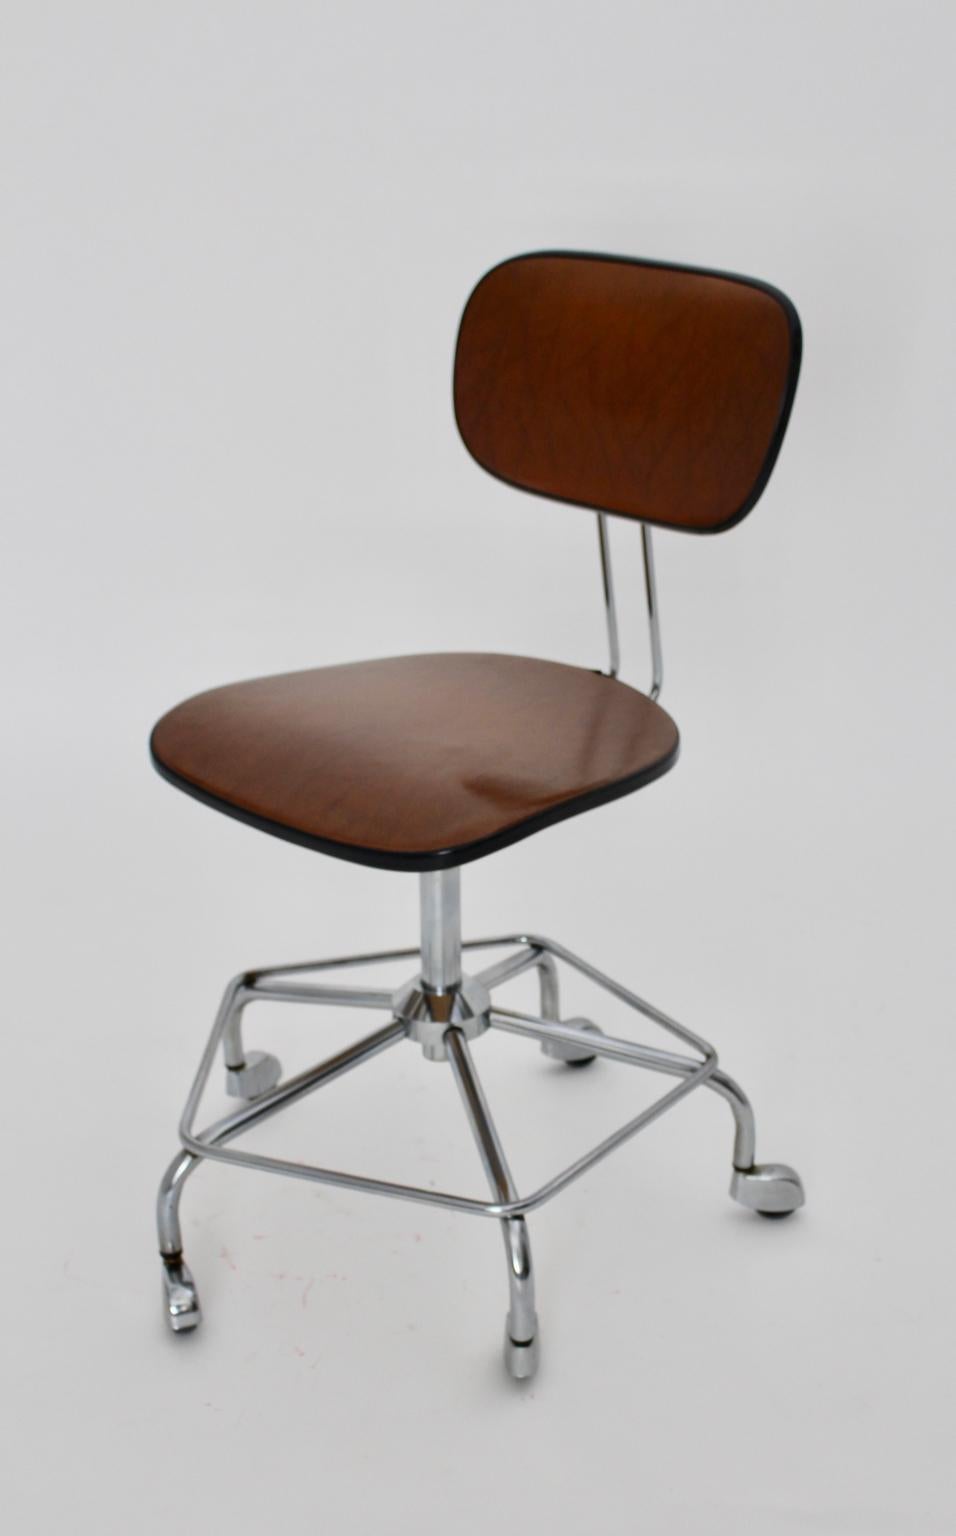 Mid-Century Modern Vintage Desk Chair Attributed to Egon Eiermann, 1950, Germany For Sale 8